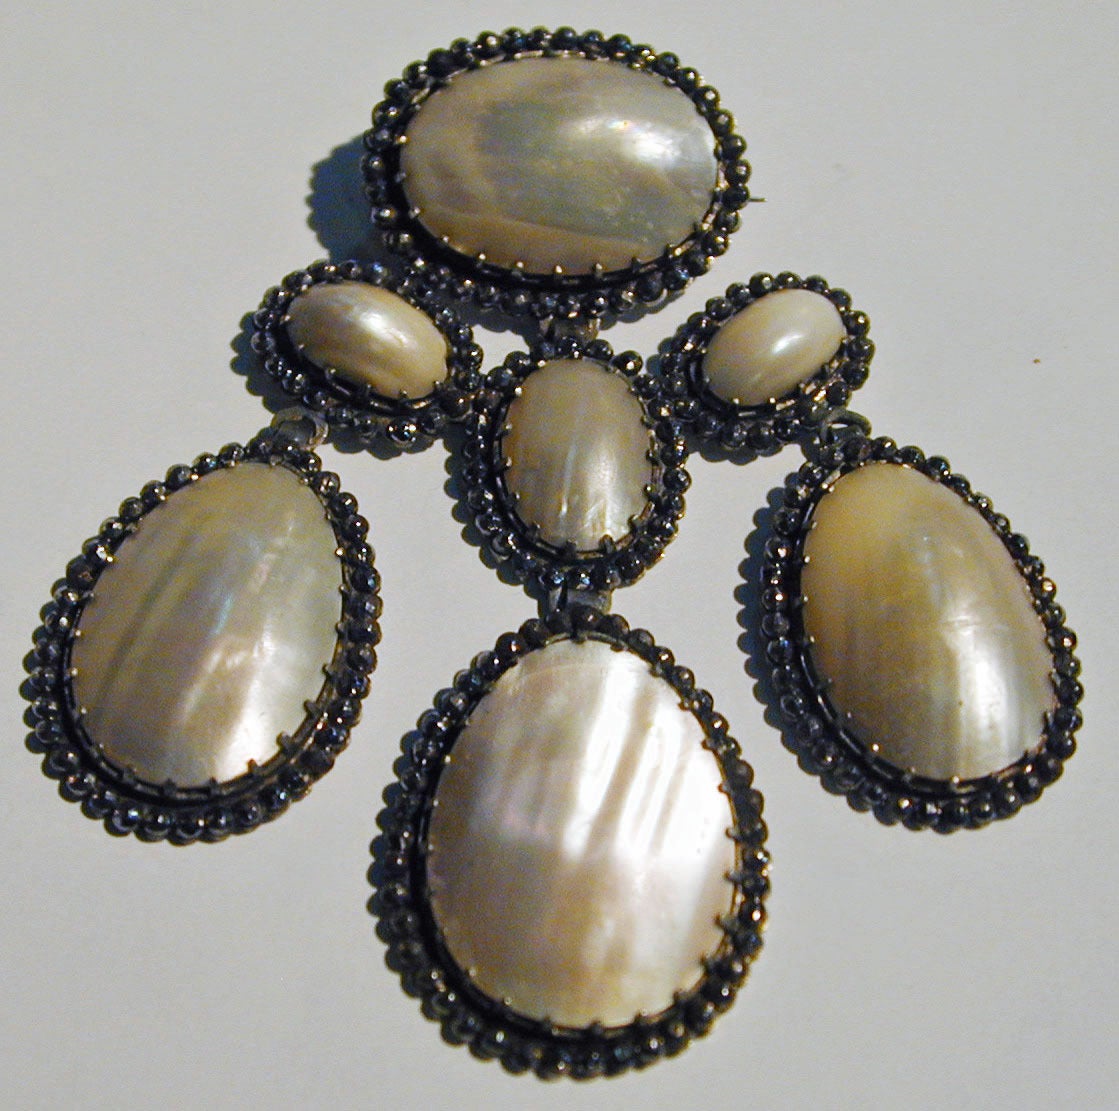 Magnificent Georgian brooch of coque de perles surrounded by iron pyrites. Coque de perle comes from the oval section of the pearly mollusk, the nautillus, found in the East Indies. This large brooch measures 3